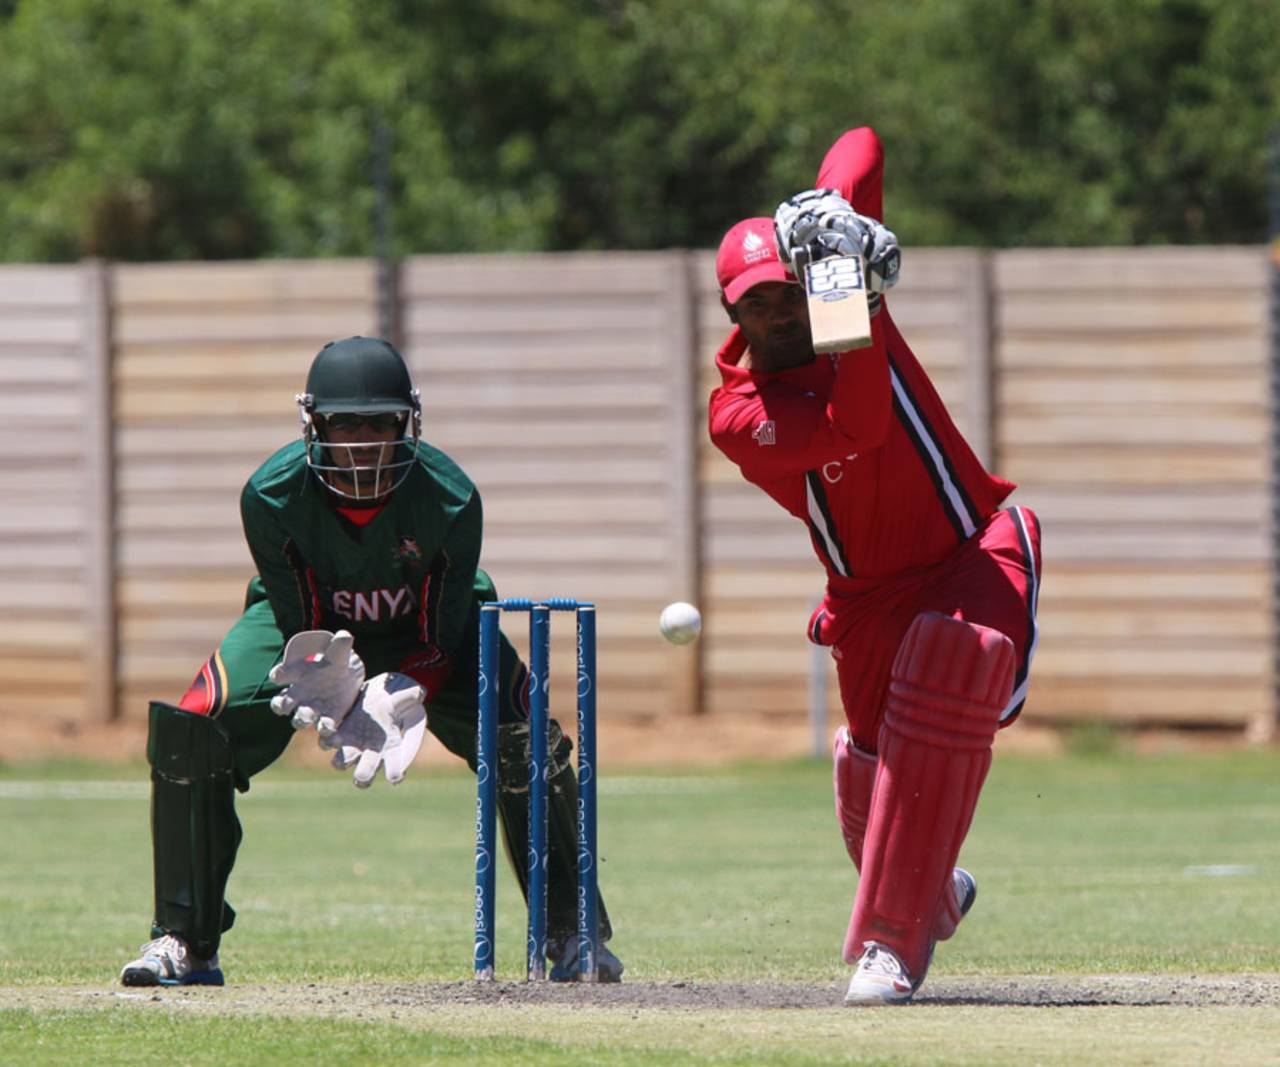 Navneet Dhaliwal scored 93 to power Canada to a competitive total&nbsp;&nbsp;&bull;&nbsp;&nbsp;ICC/Helge Schutz